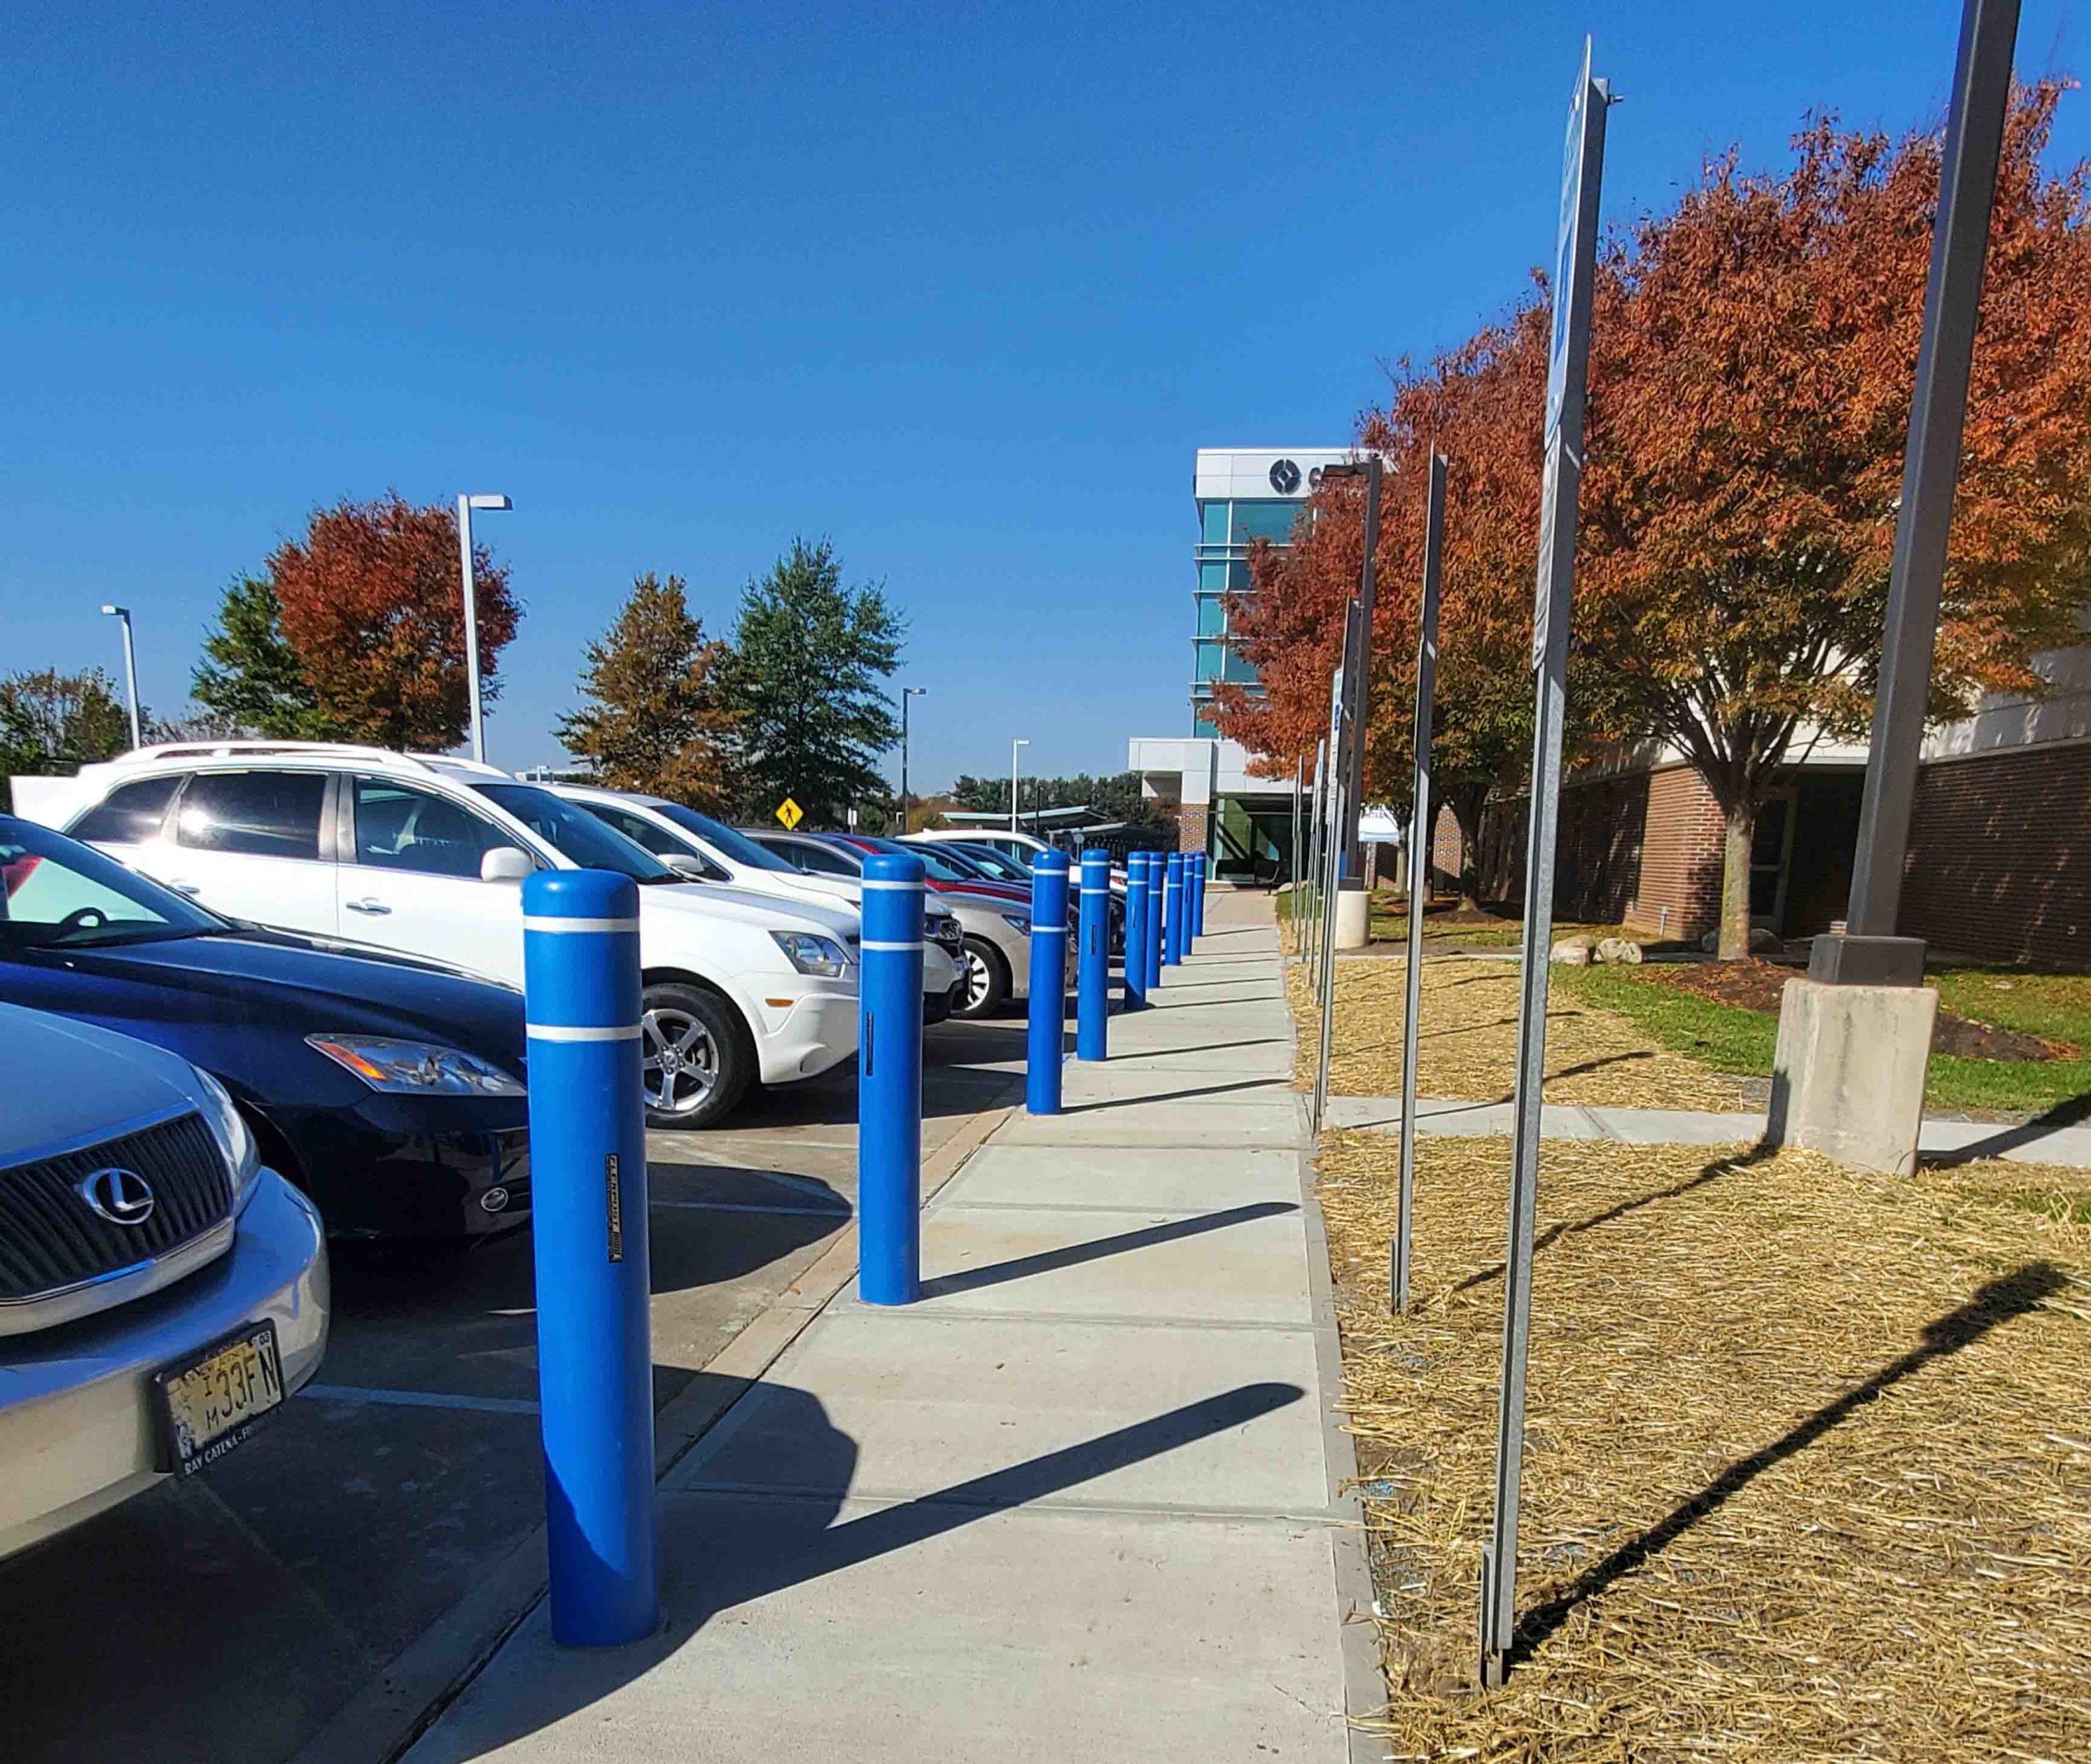 Flexible Bollards Can Be Used to Deter Impact